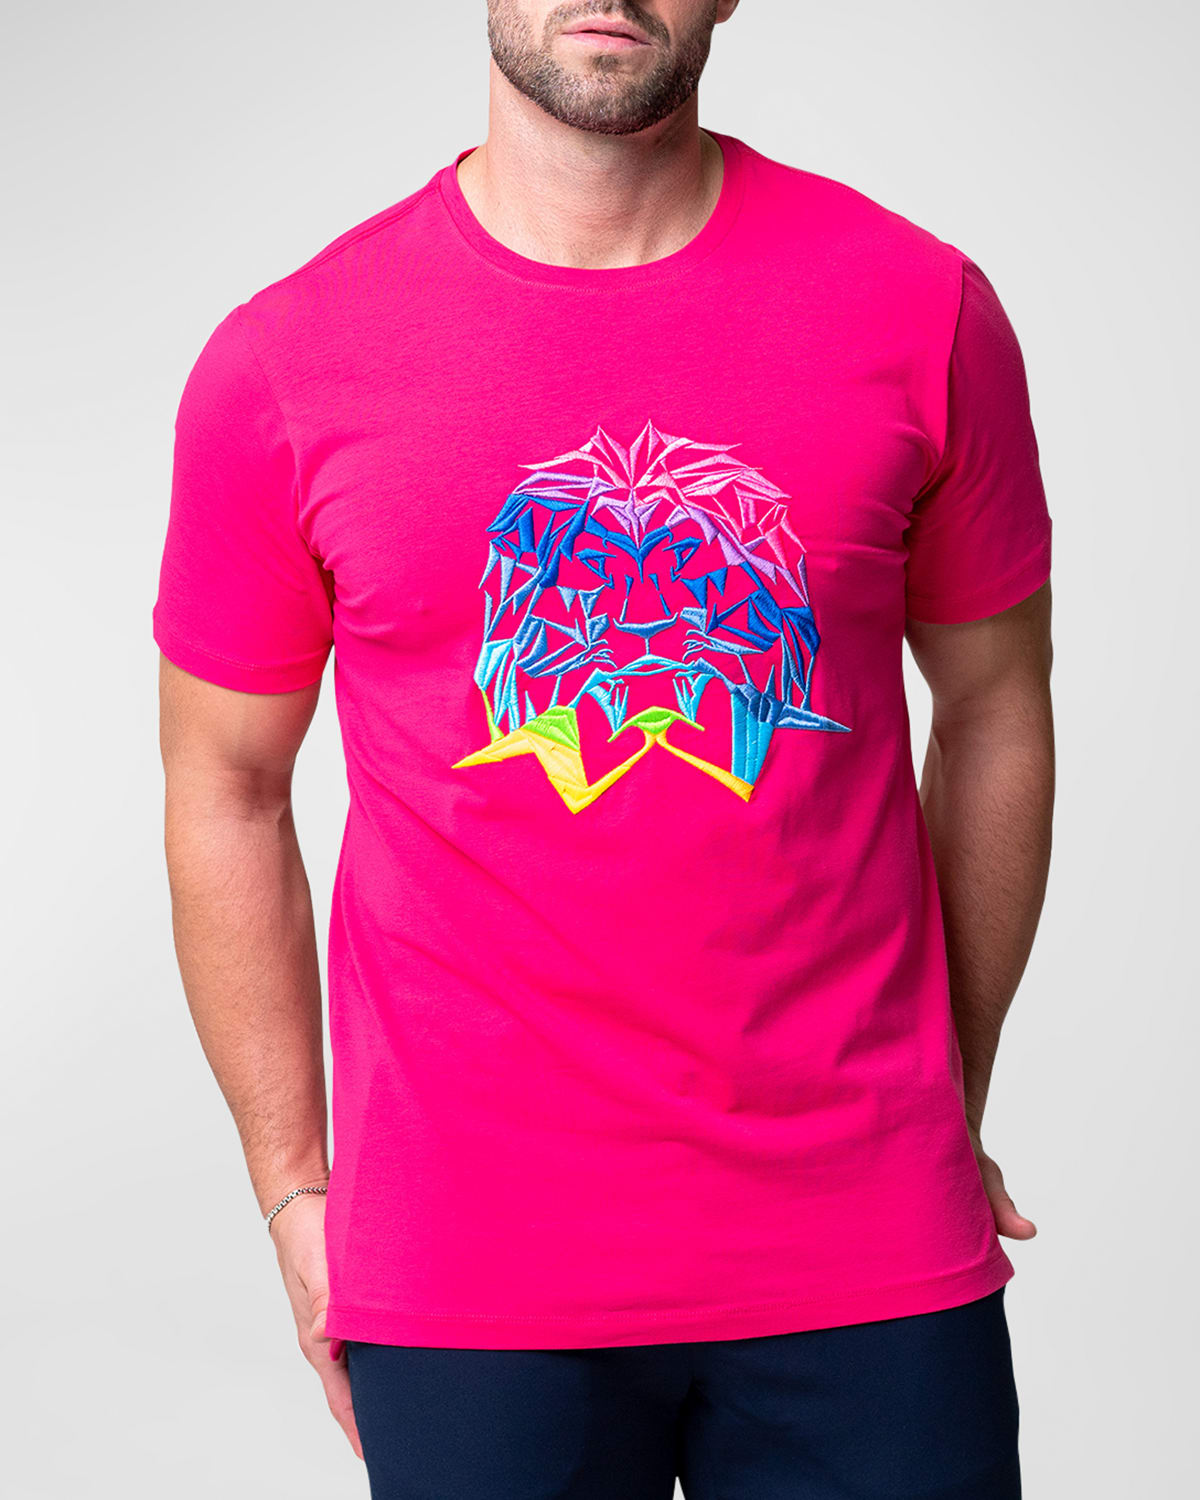 Men's Neon Embroidered T-Shirt